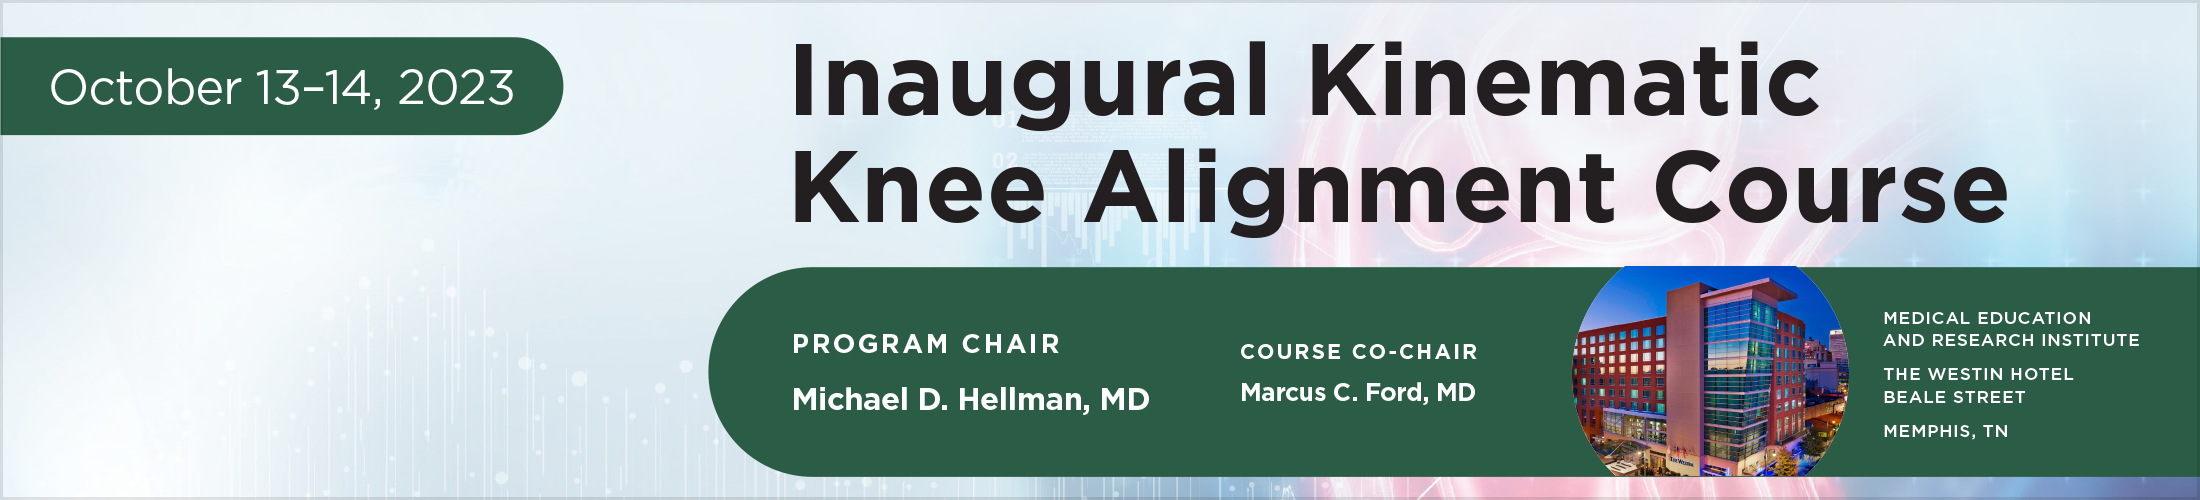 Kinematic Knee Alignment Course